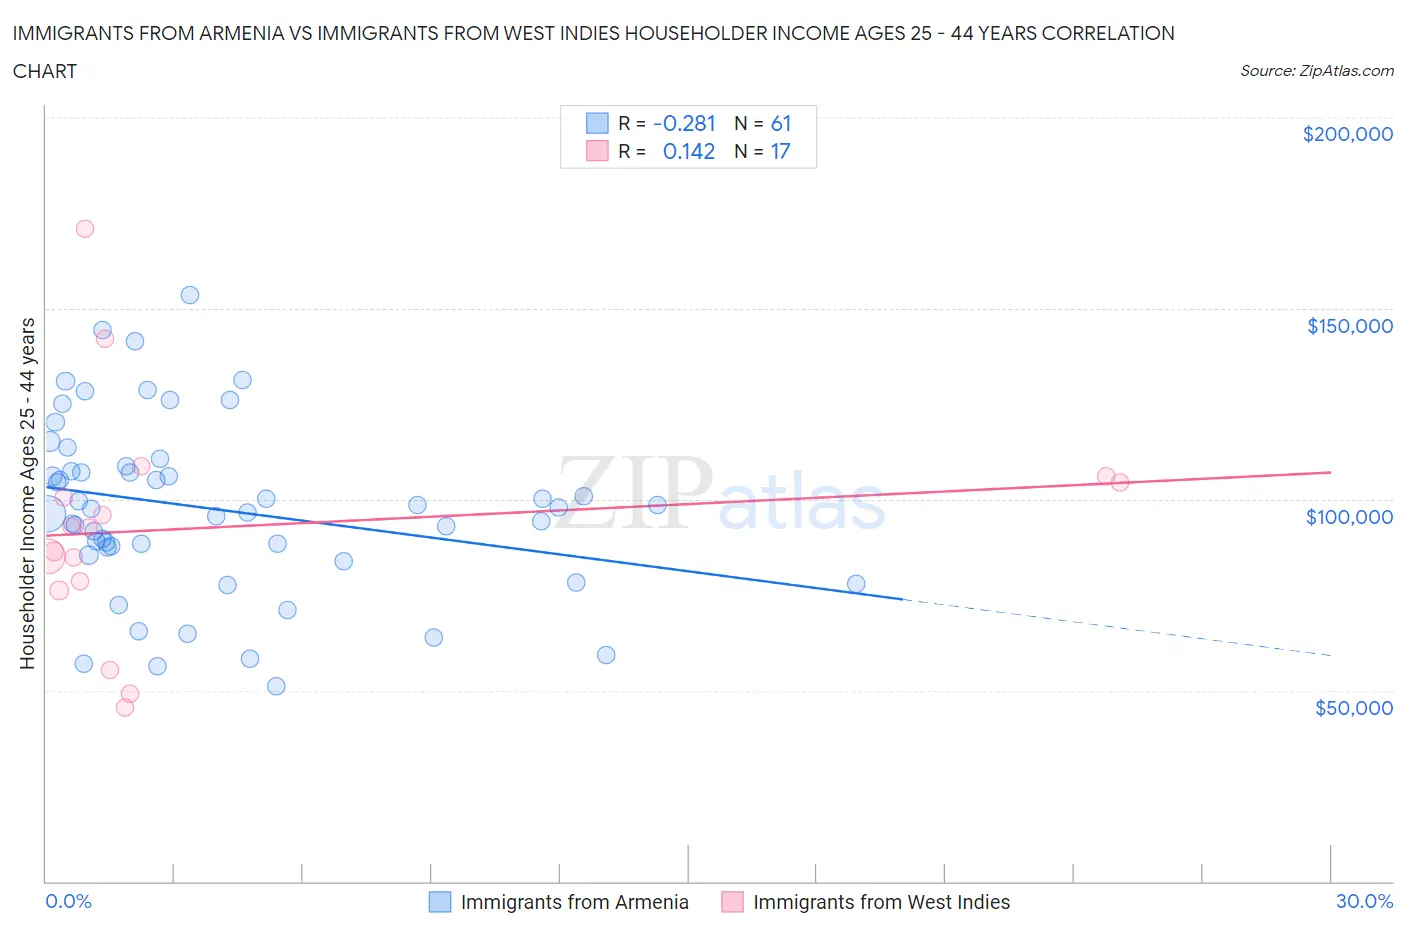 Immigrants from Armenia vs Immigrants from West Indies Householder Income Ages 25 - 44 years